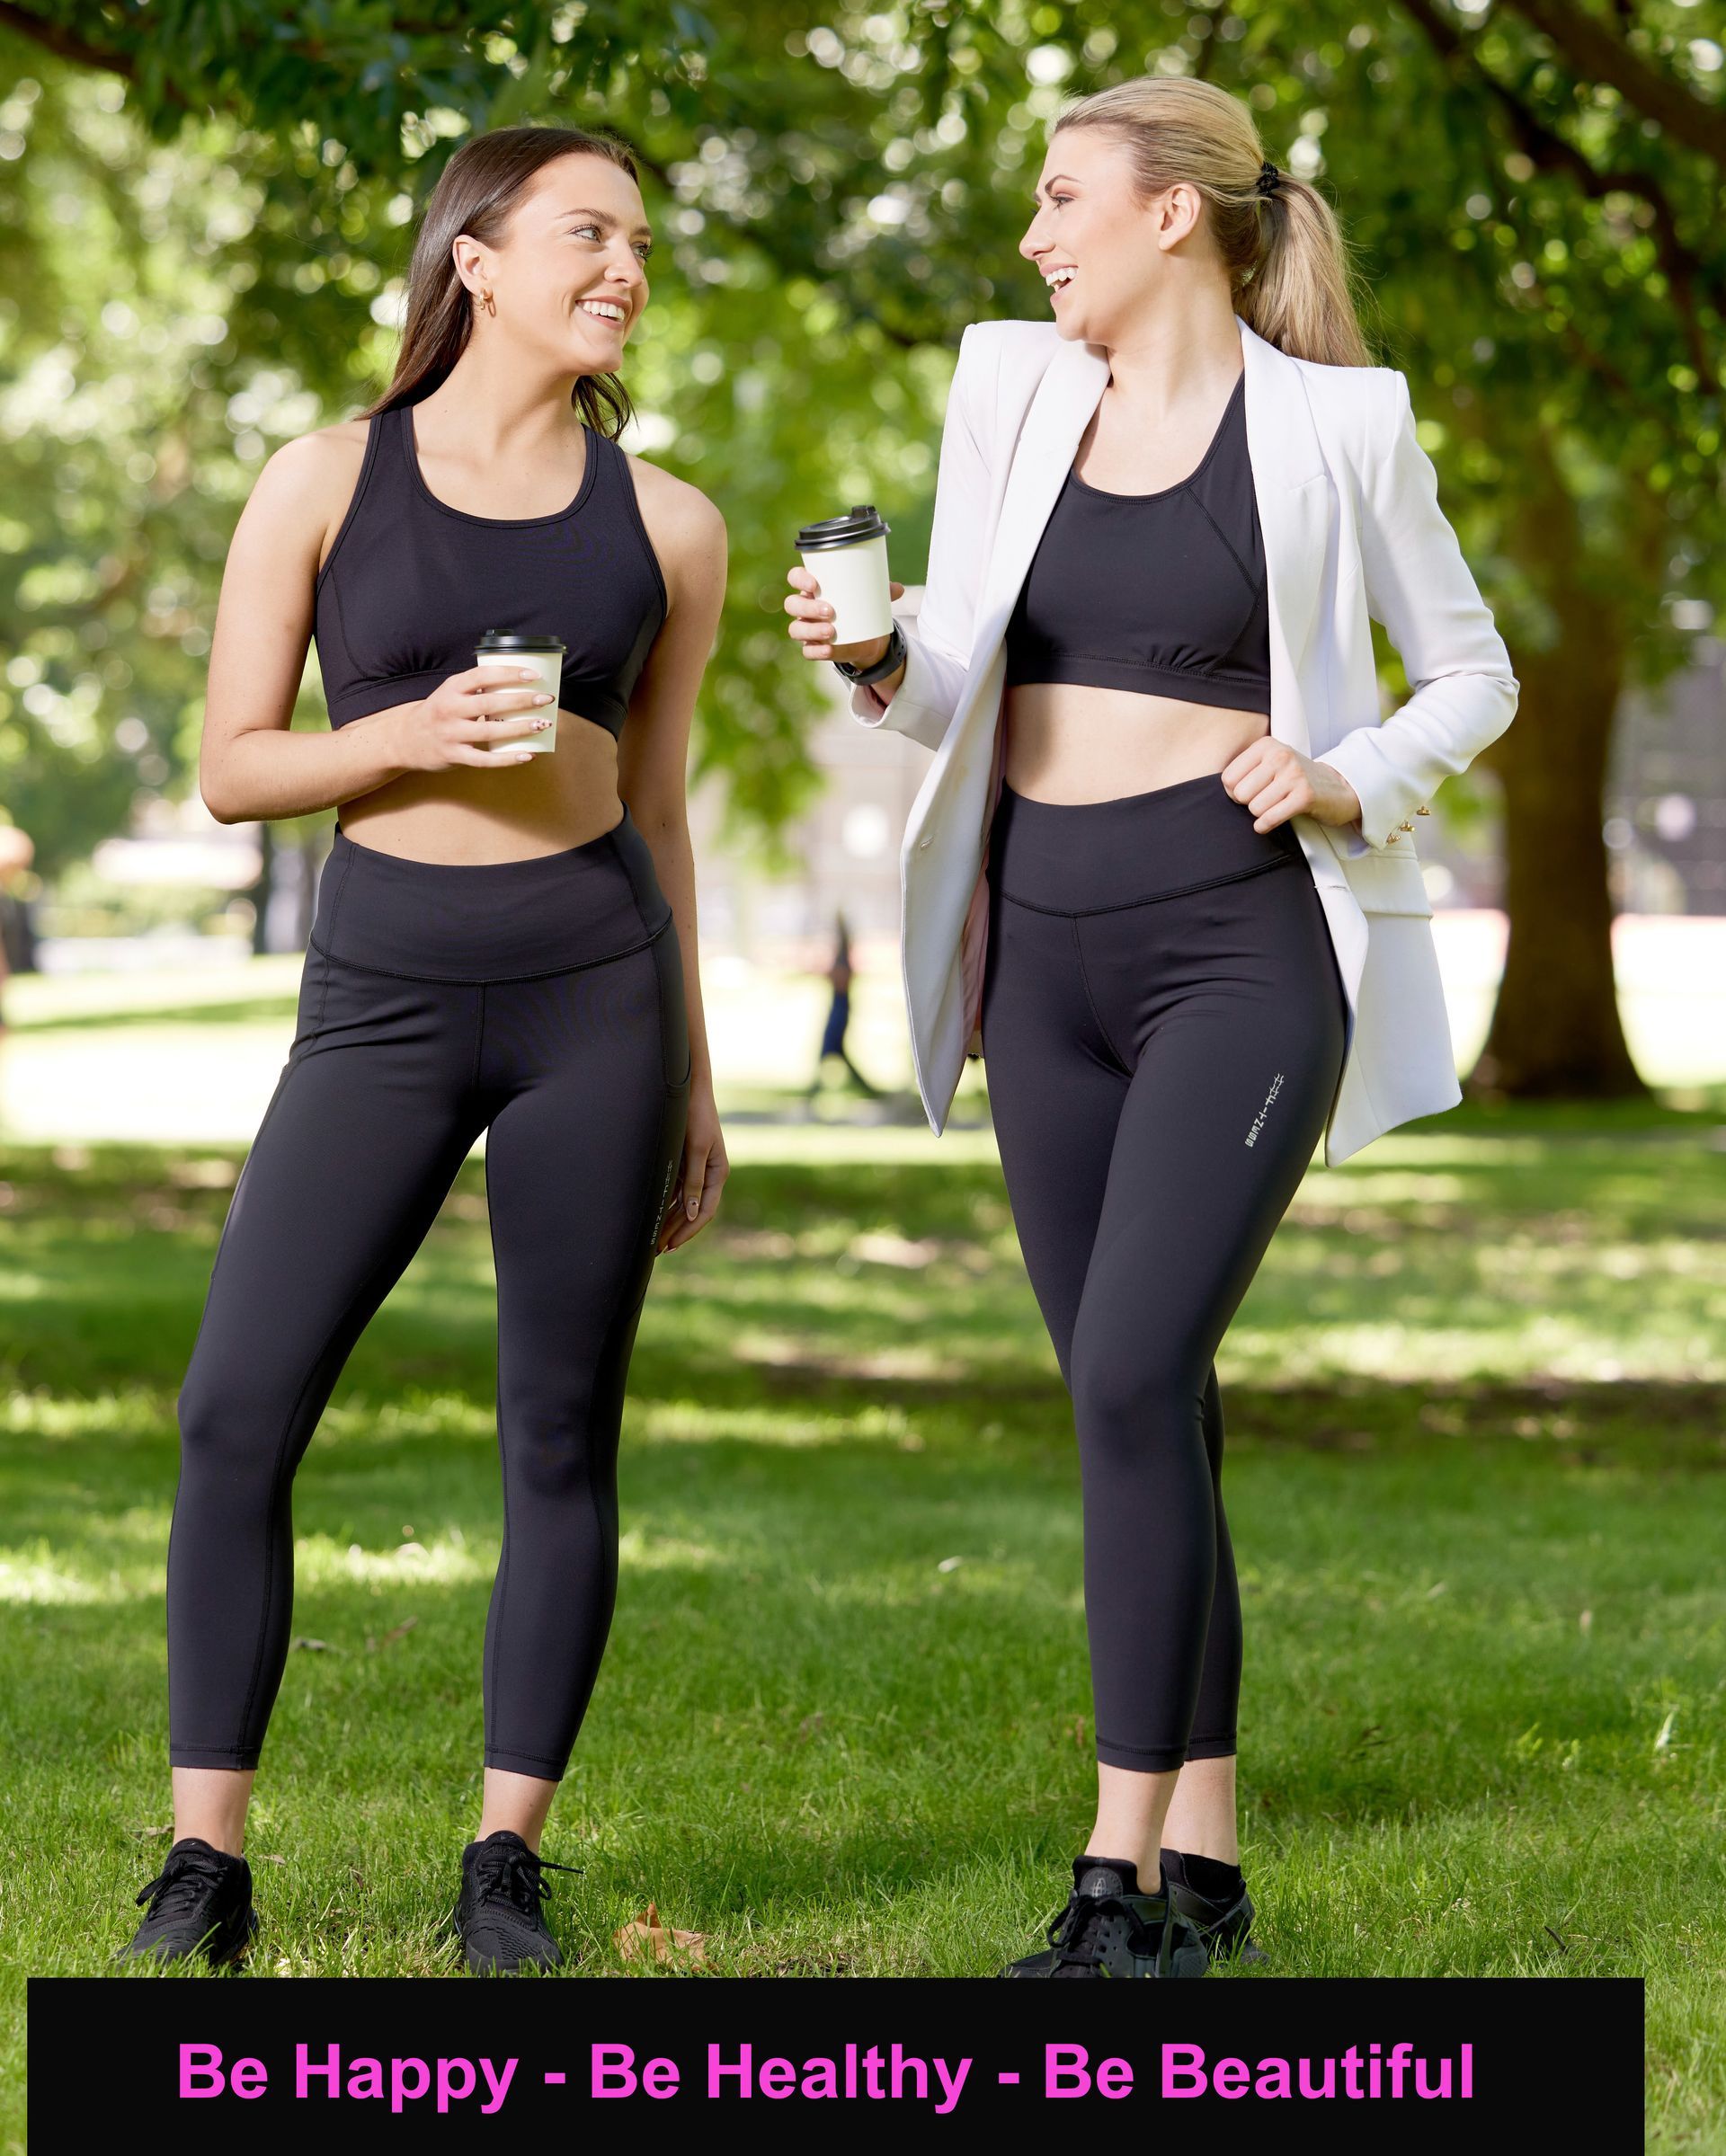 Two girls - one wearing Athleisure and one training in leggings and bra